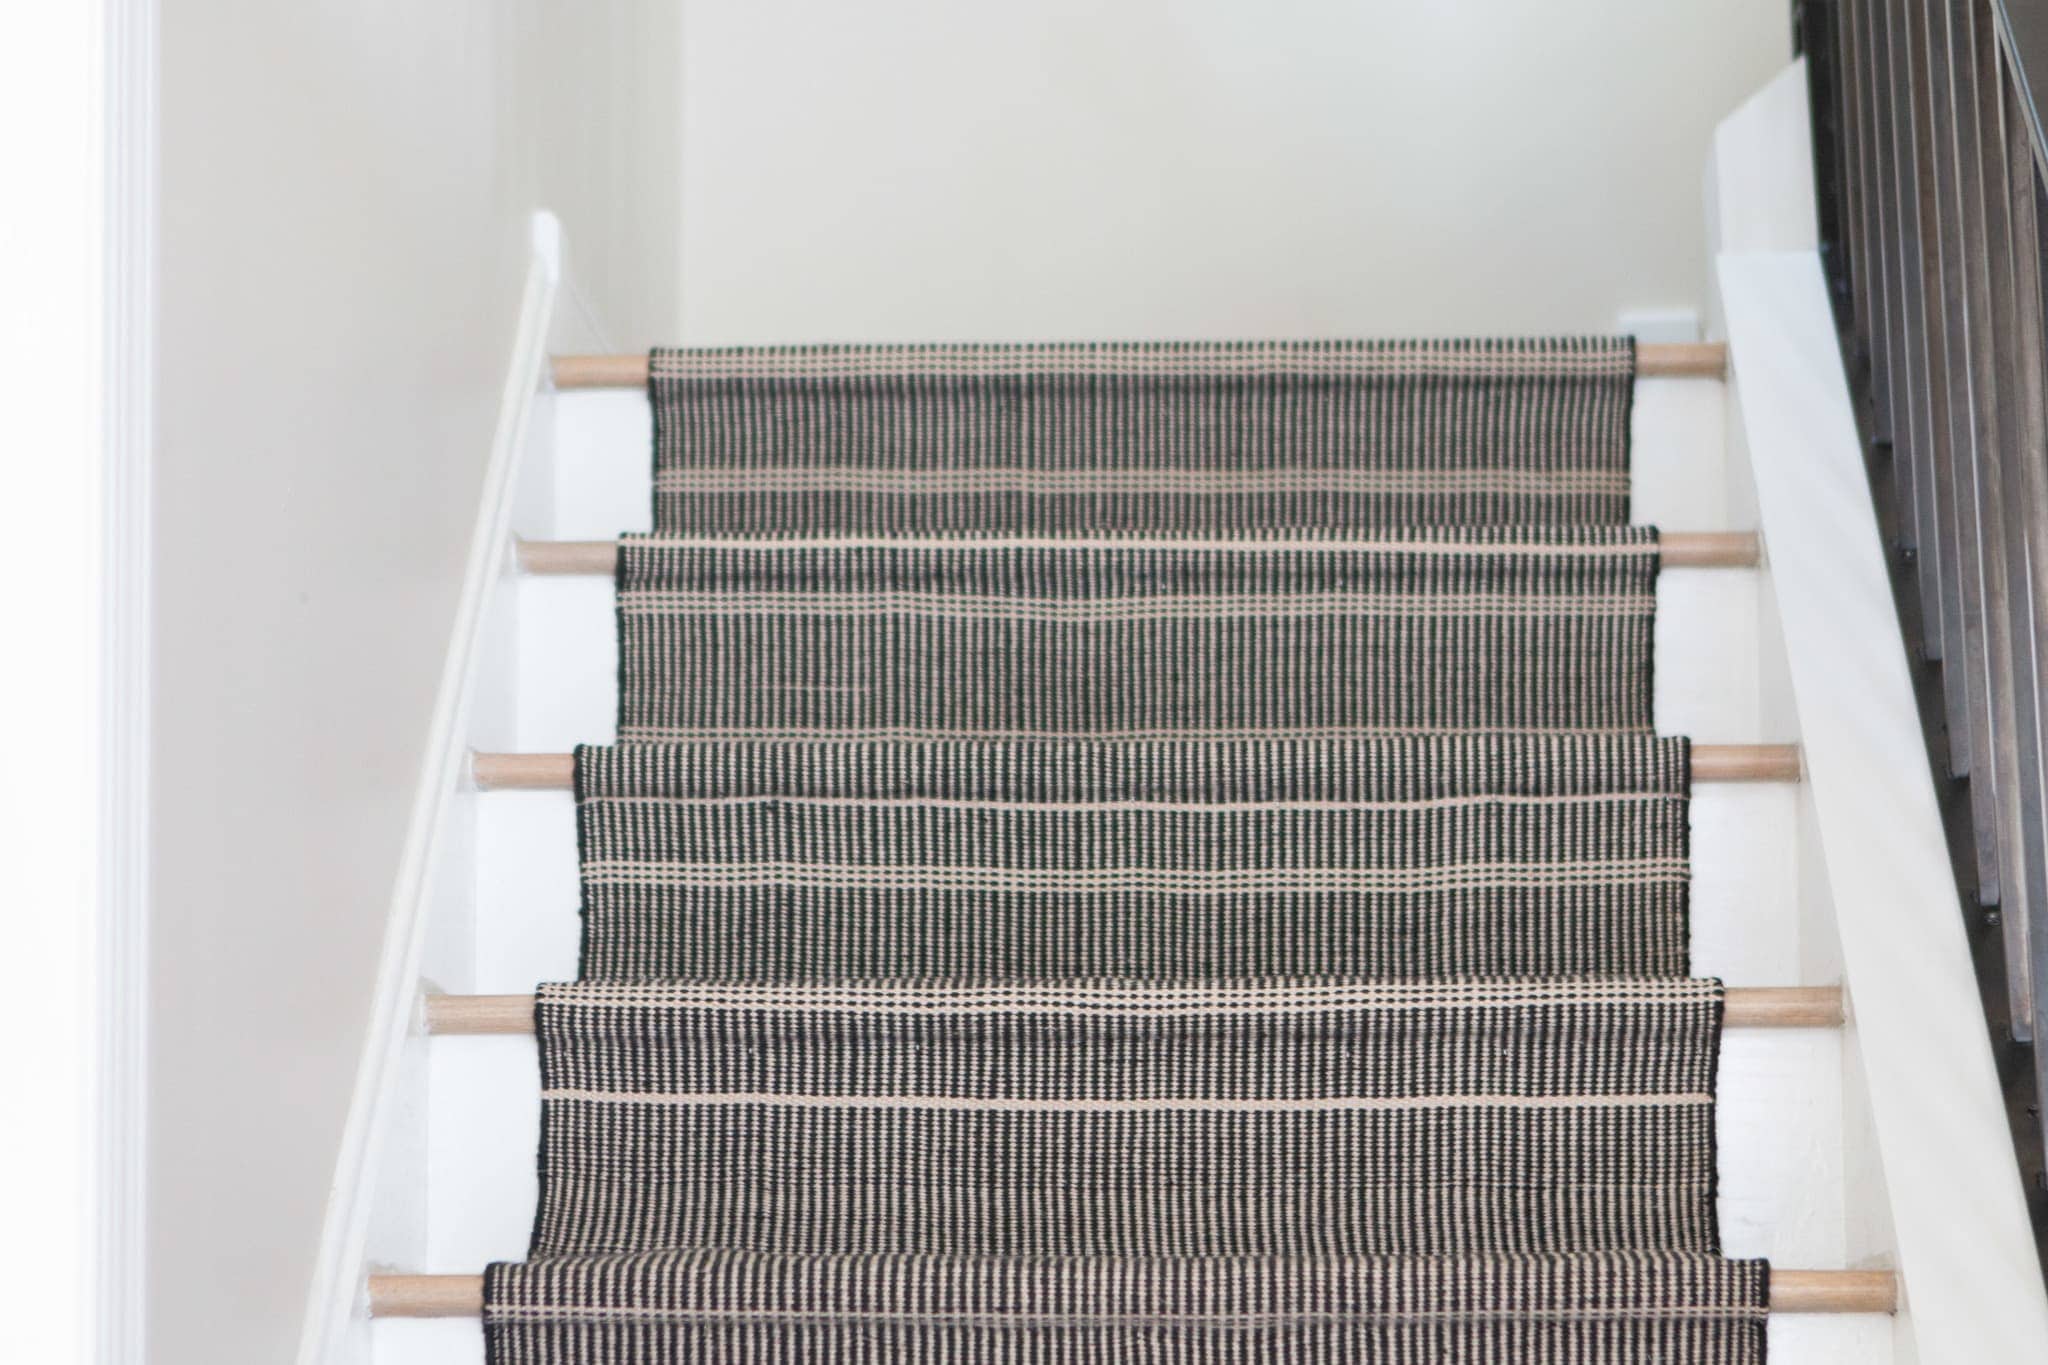 Our new stair runner